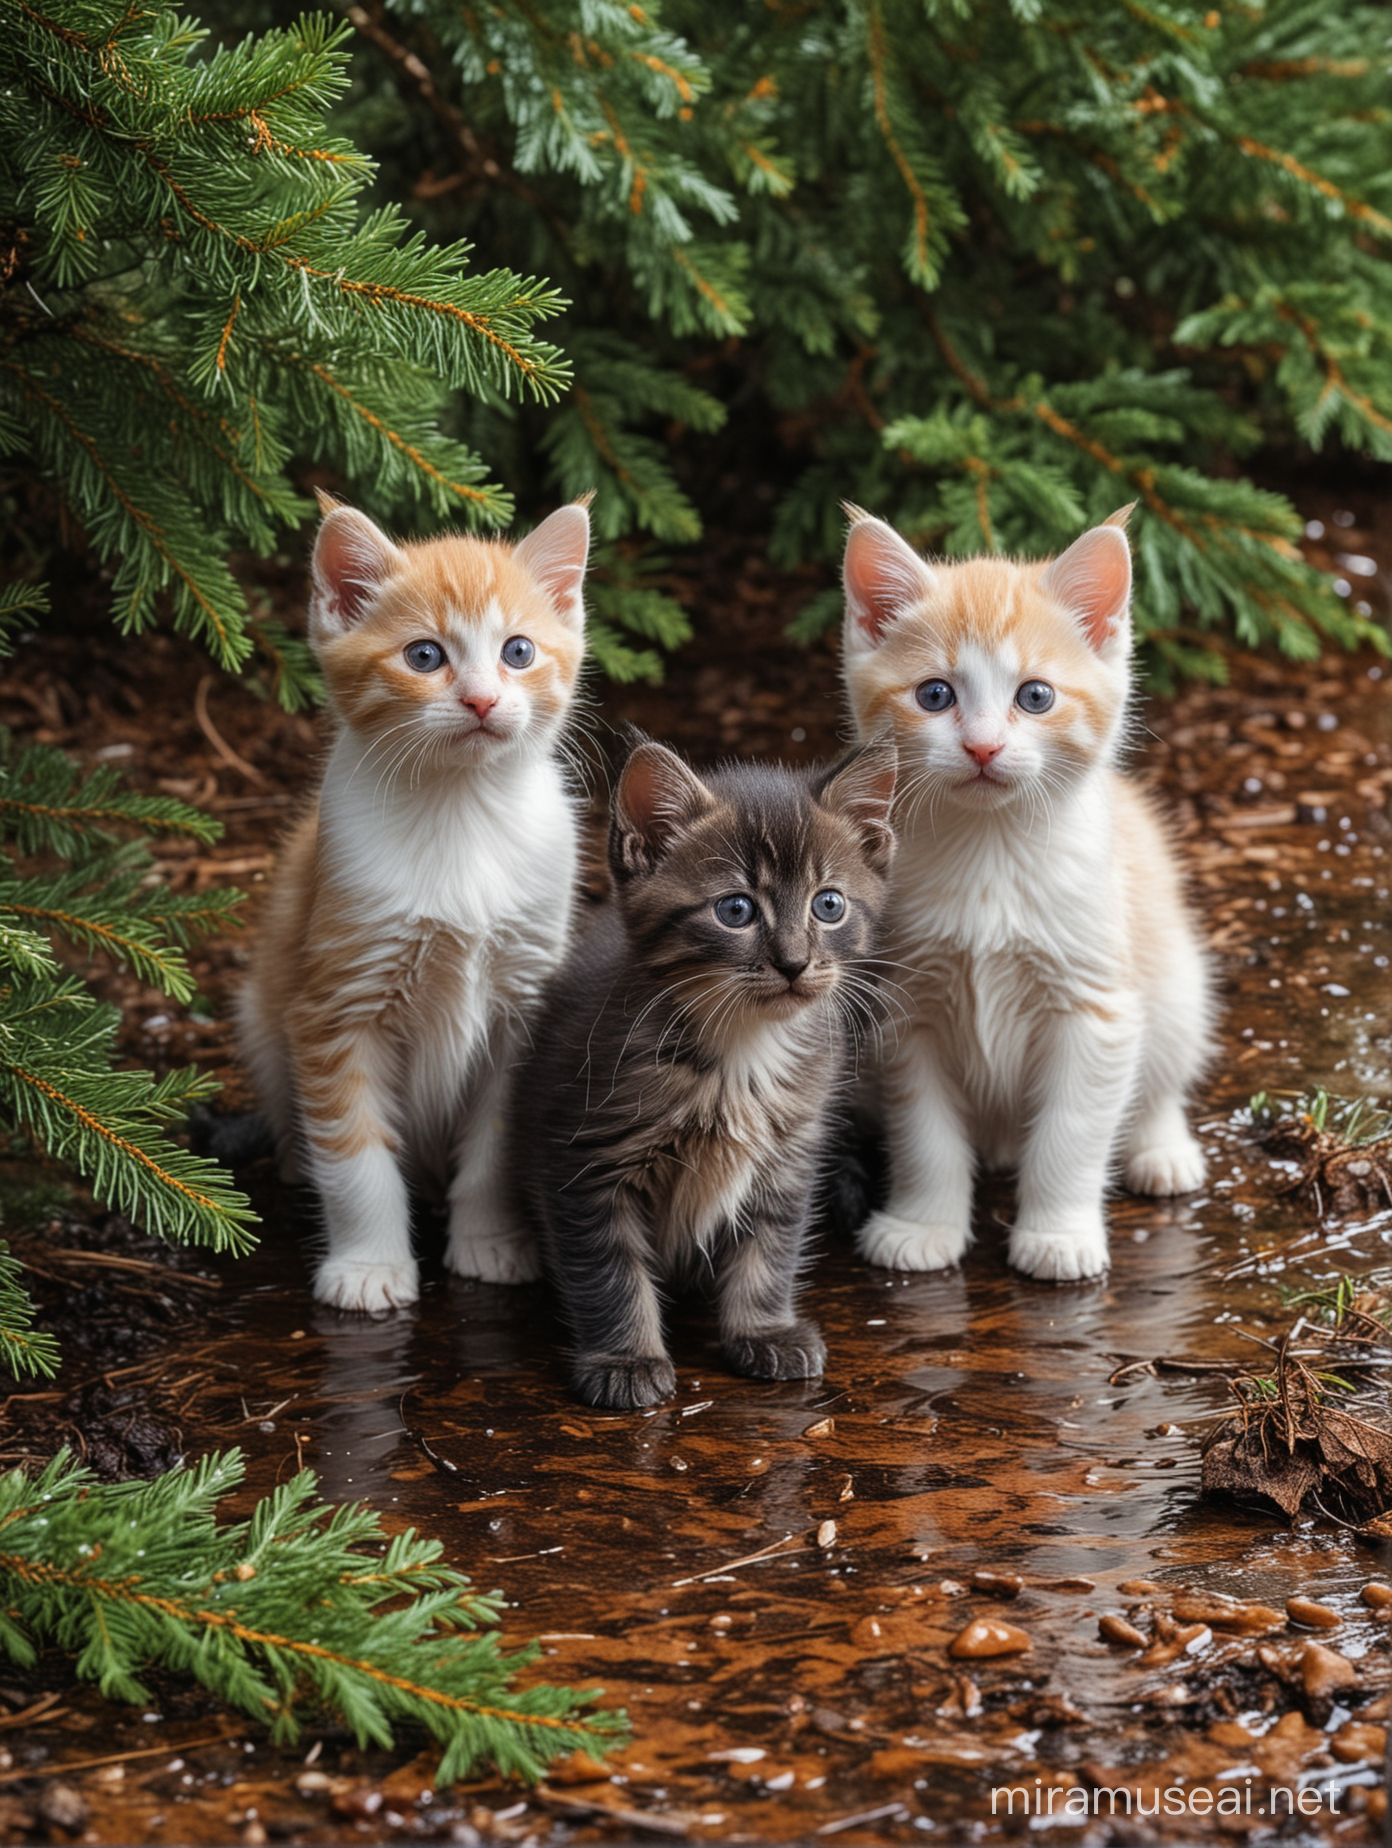 Colorful Kittens Spilled and Wet in Forest Under Fir Tree